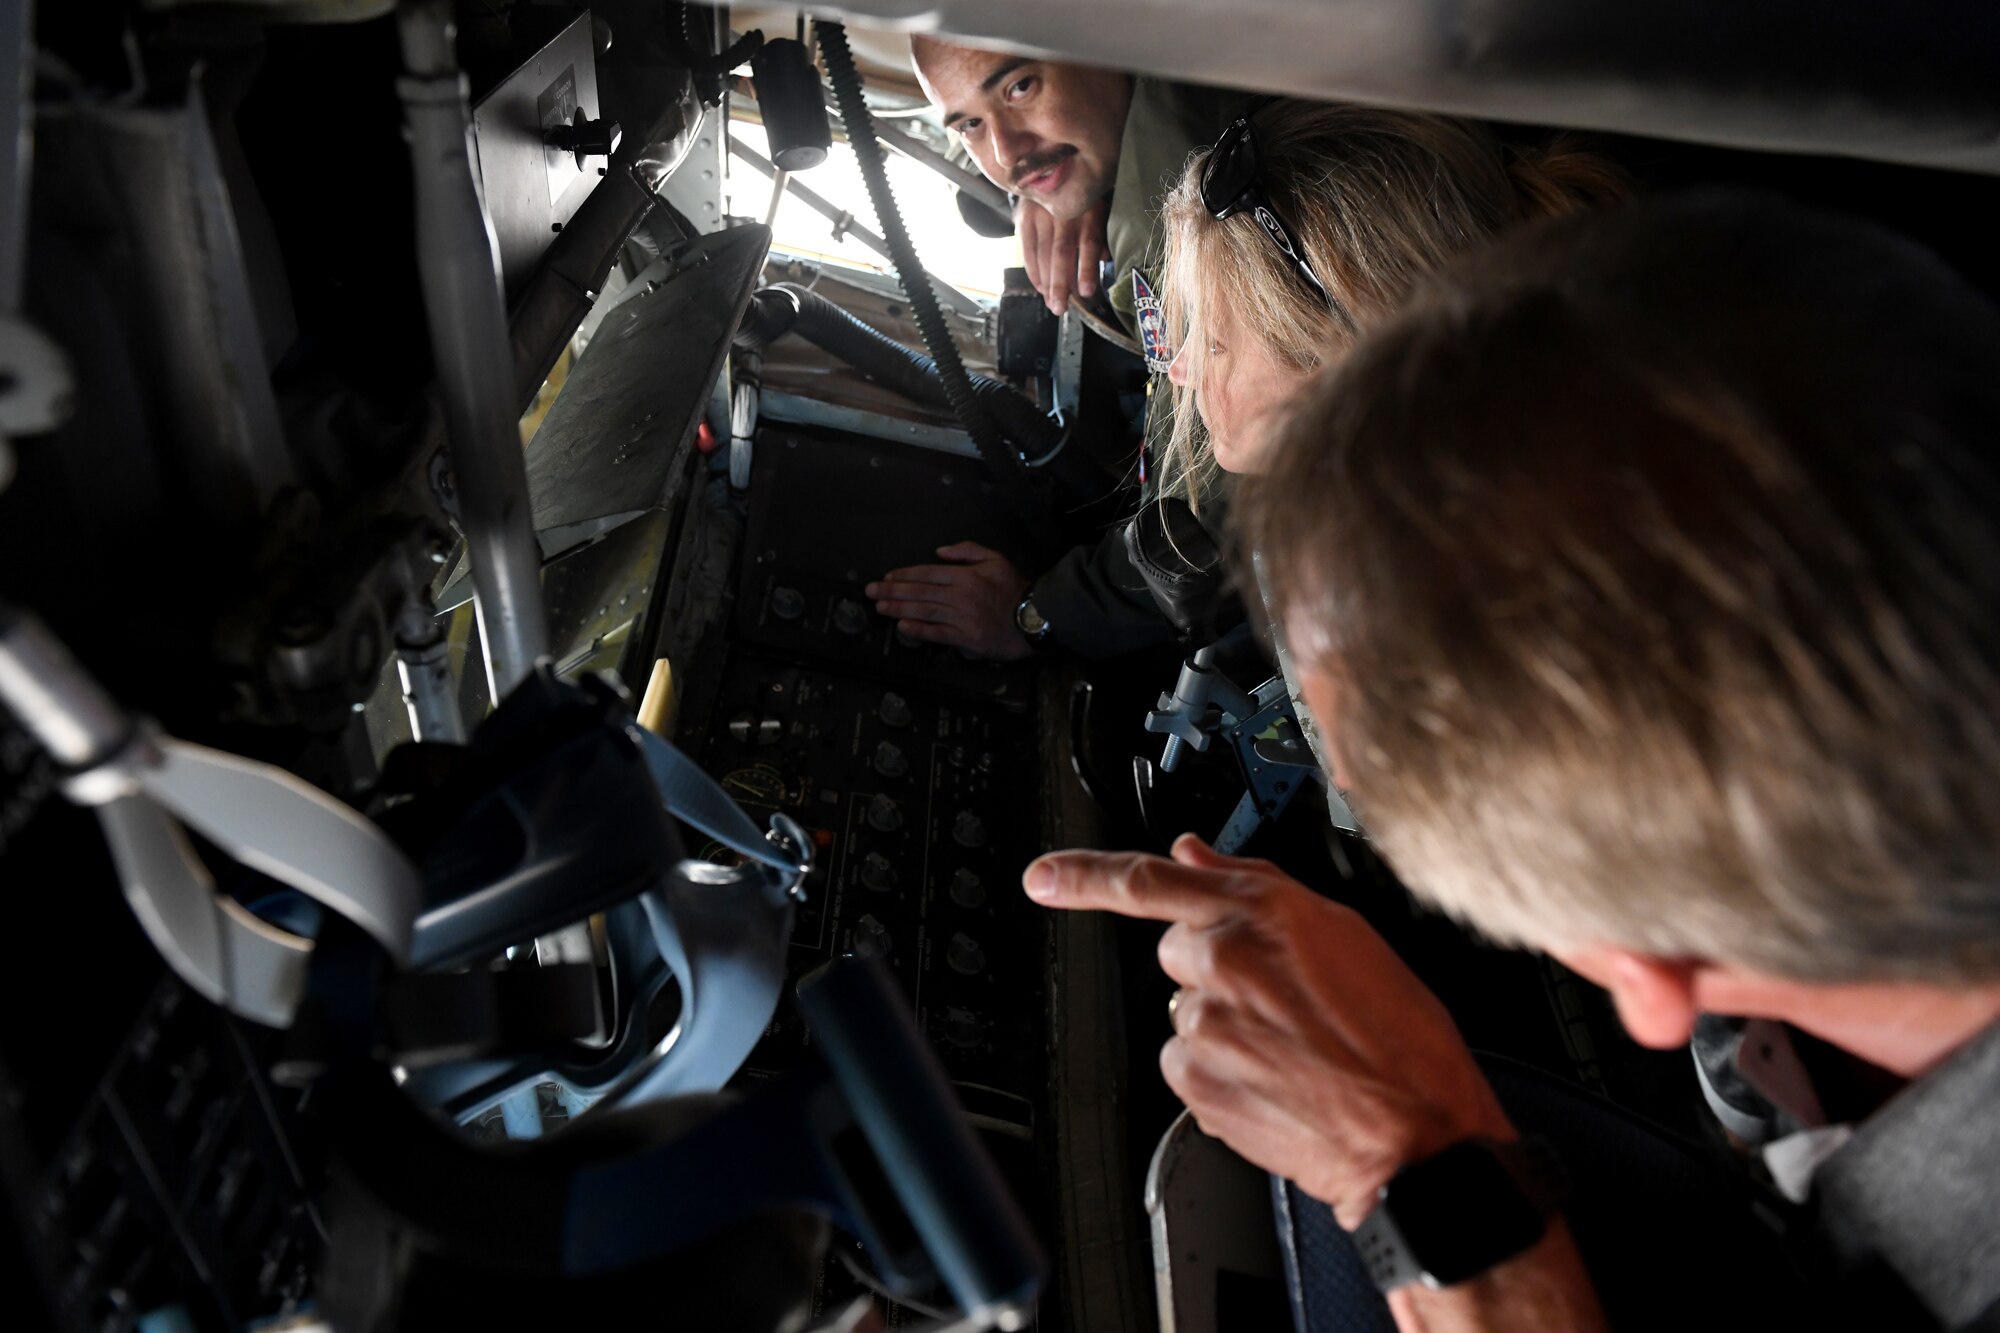 Tech. Sgt. Ezekiel Brito, 54th Air Refueling Squadron boom operator, shows honorary commanders the boom pod on the KC-135 Stratotanker, May 31, 2019, at Altus Air Force Base, Okla. The honorary commanders were given the opportunity to visit all three major weapons systems at the base during the Honorary Commanders Boot Camp. (U.S. Air Force Photo by Senior Airman Jackson N. Haddon)